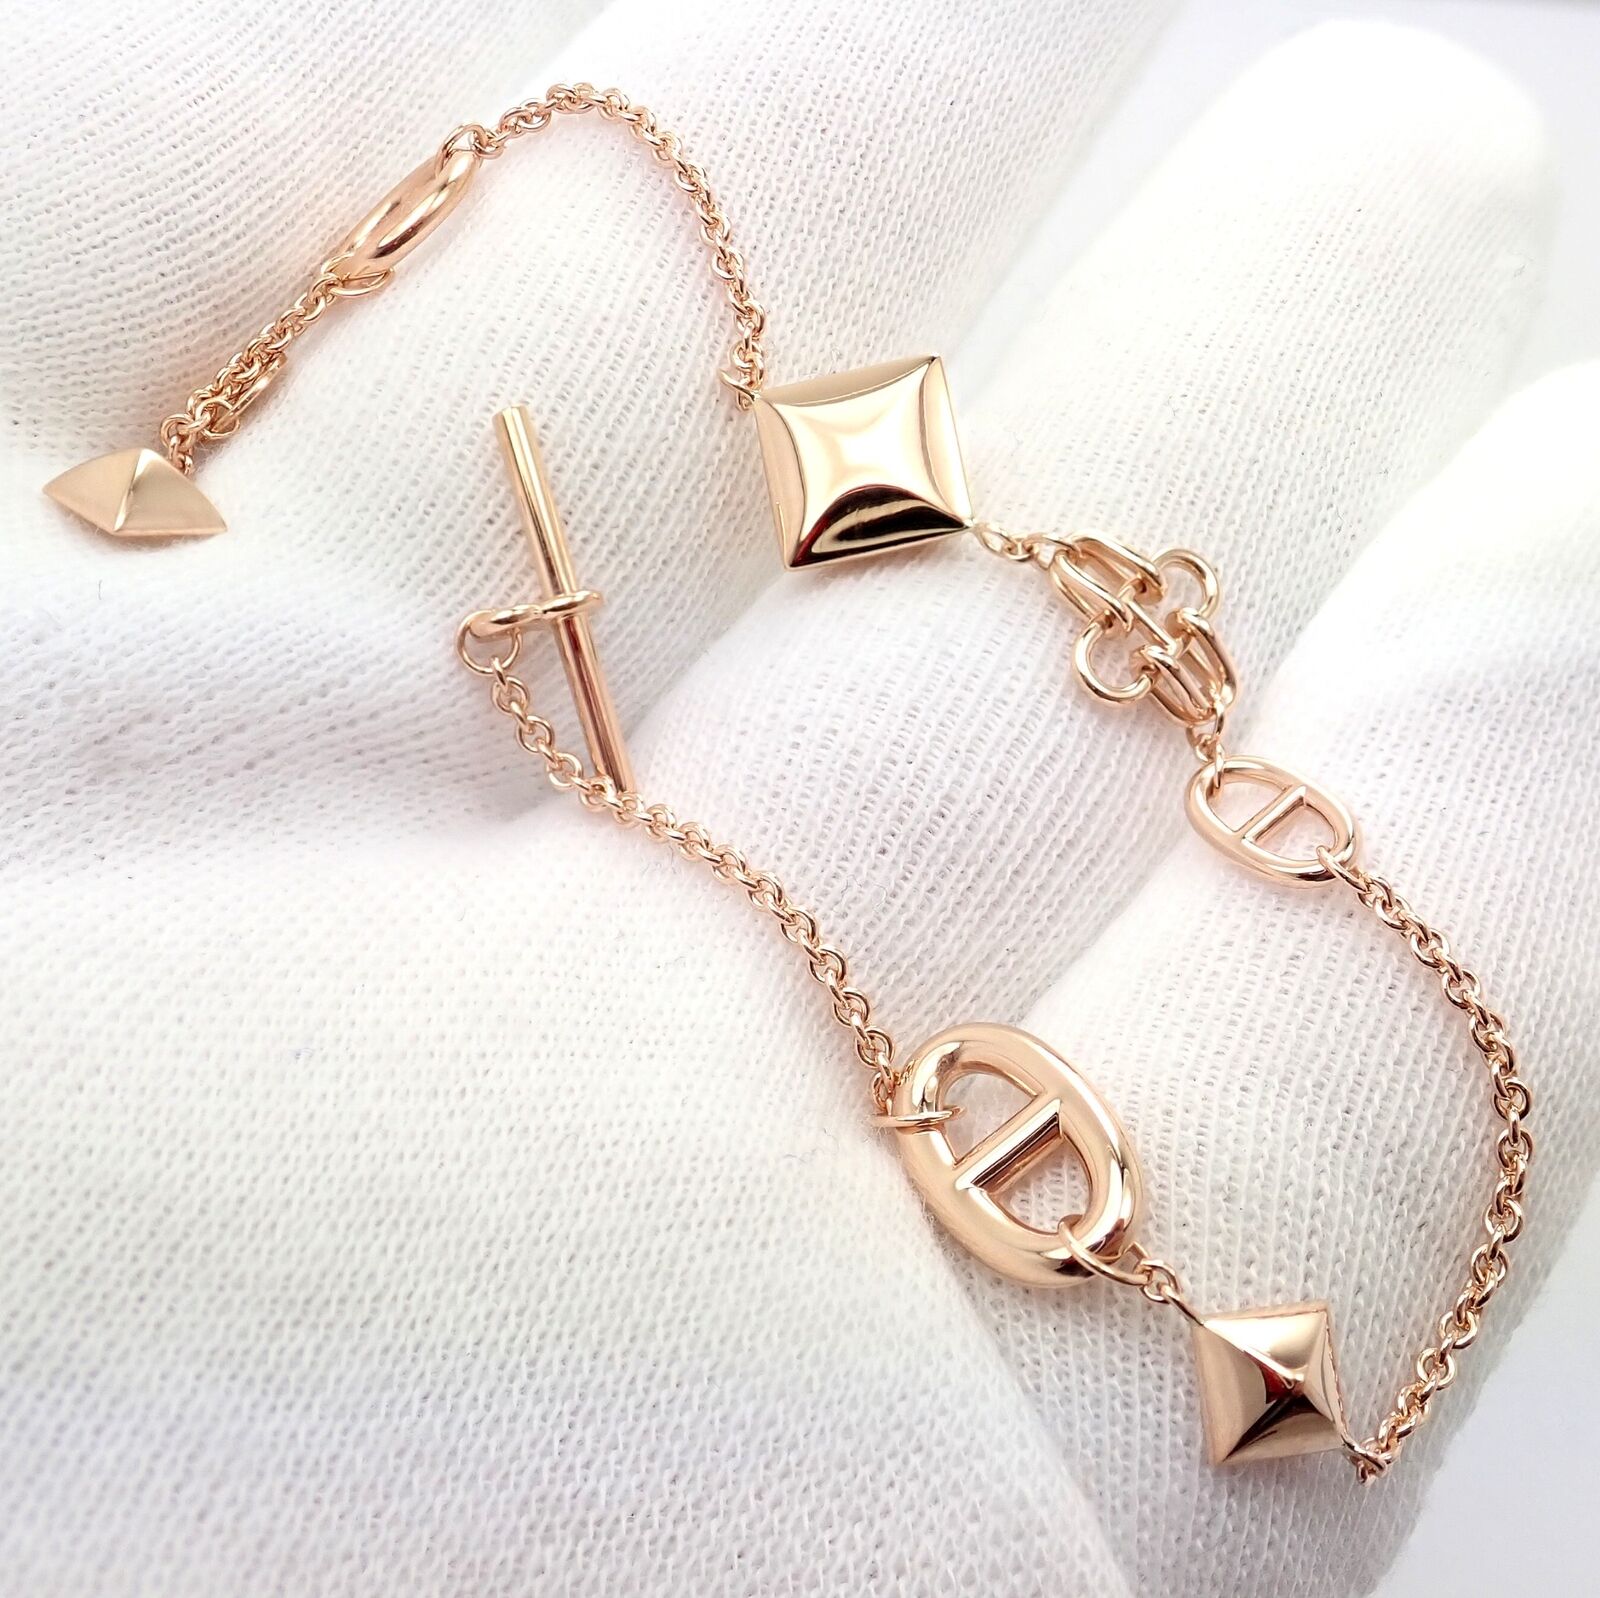 Hermes Jewelry & Watches:Fine Jewelry:Bracelets & Charms Authentic! Hermes 18k Rose Gold Signature Iconic Logos Link Toggle Bracelet